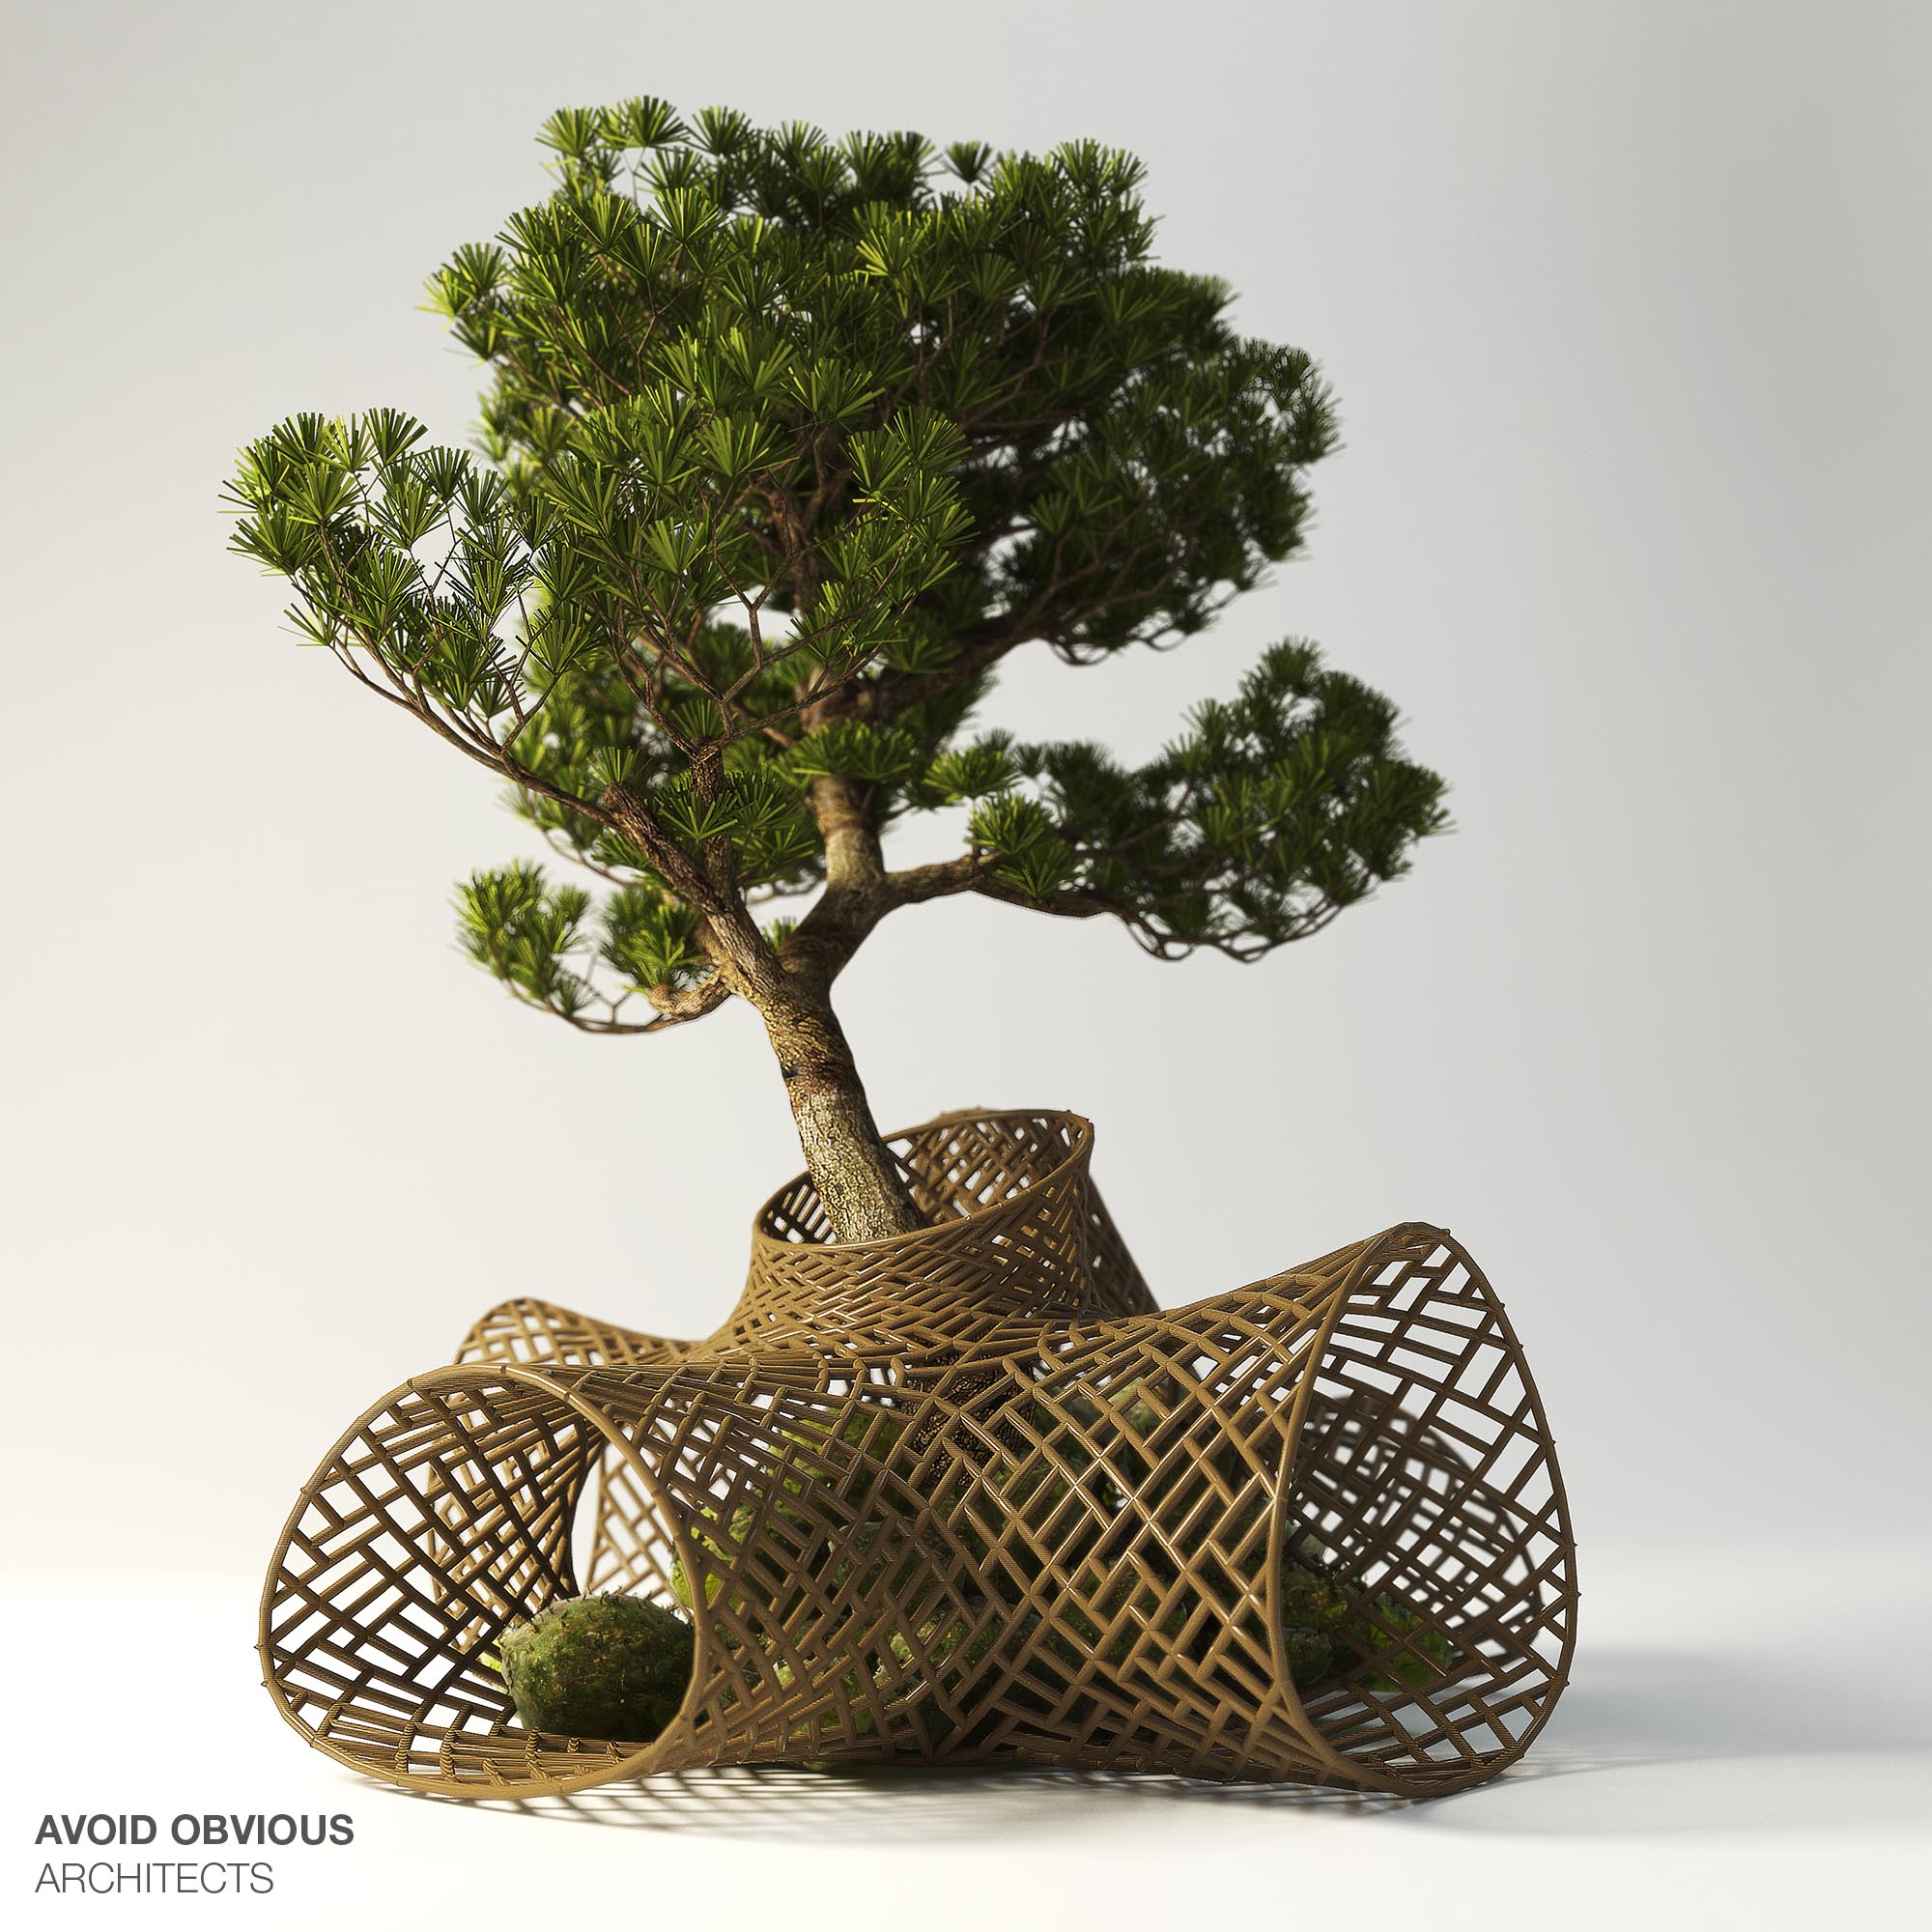 sustainable, architecture, life cycle, material, smart, living, organism, coffee, 3d printing, avoid obvious, masterplan, green, futuristic, ecological, future, bamboo, trees, plants, wood, nature, learning, center